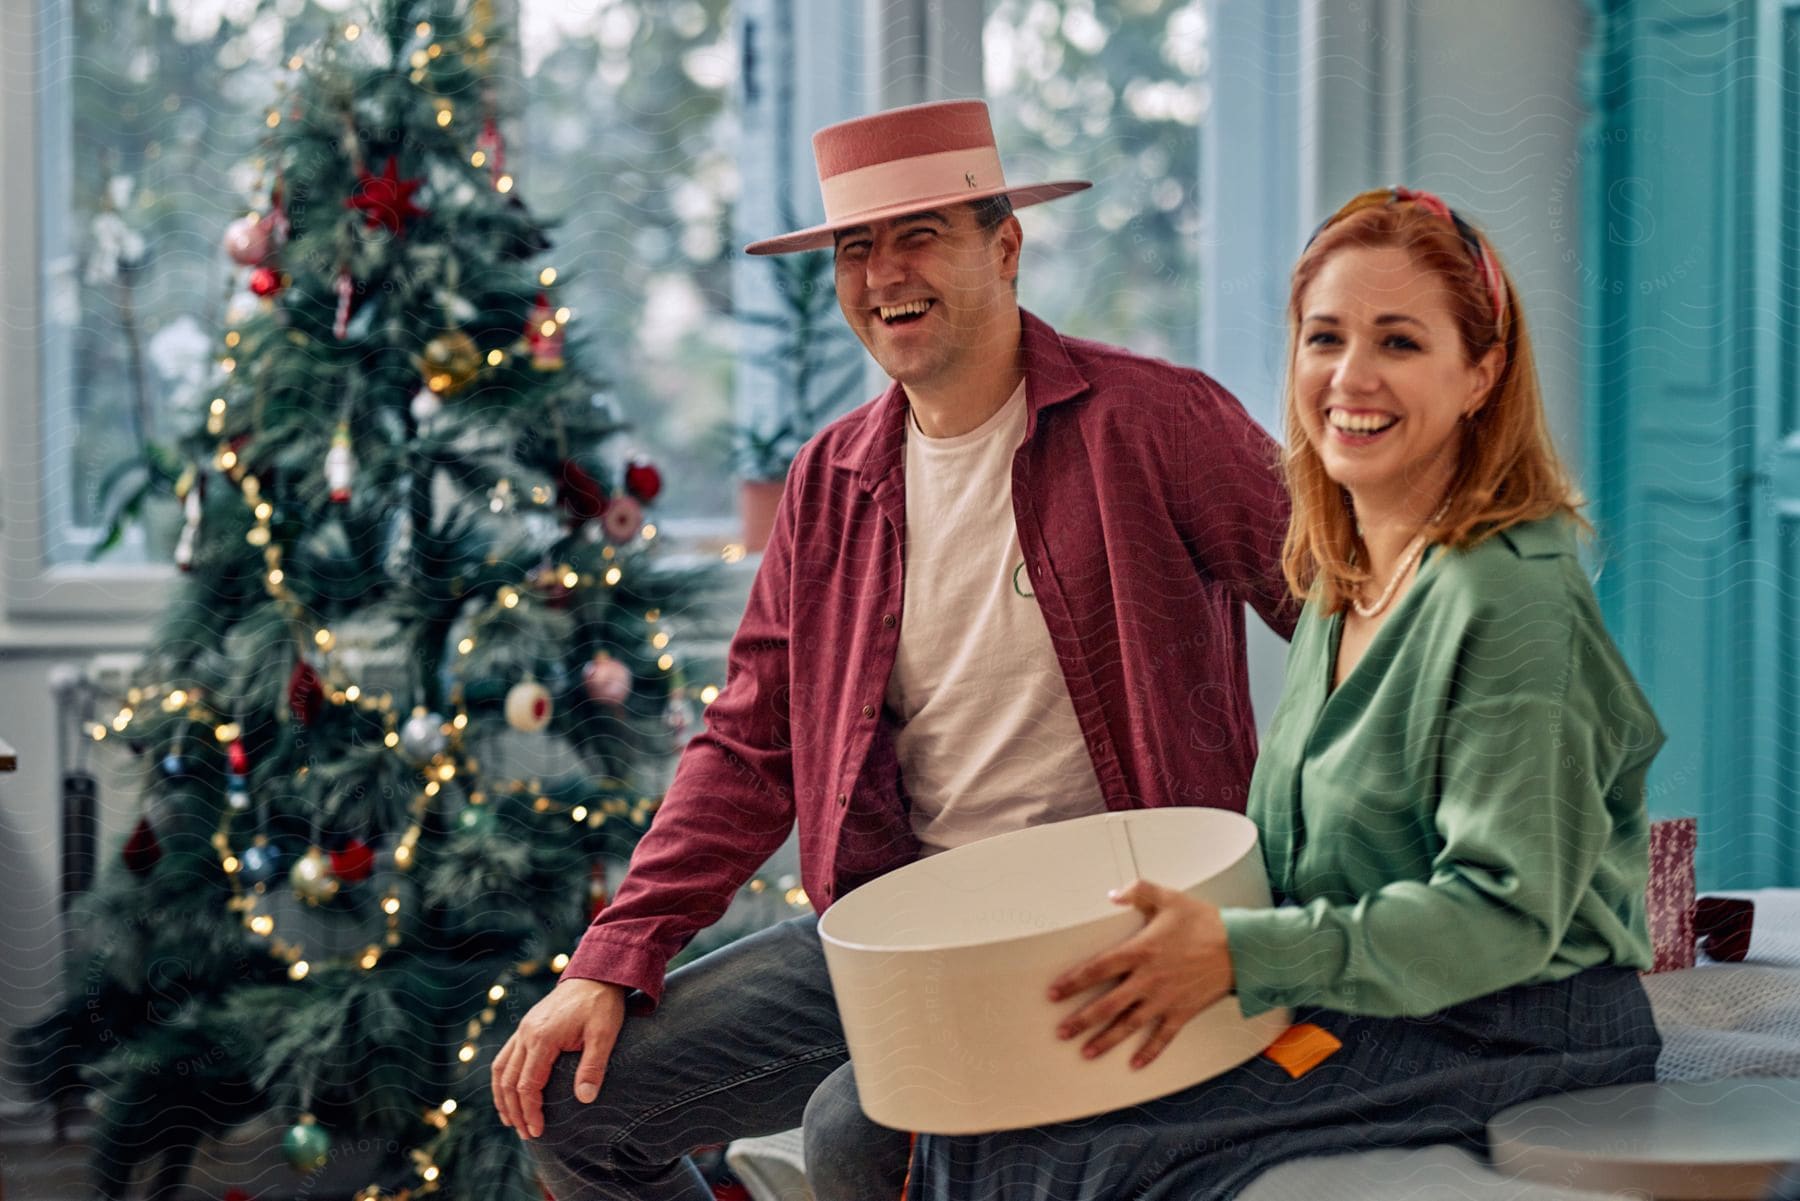 Smiling couple sitting, with the woman holding a gift box, and beside them a decorated Christmas tree.